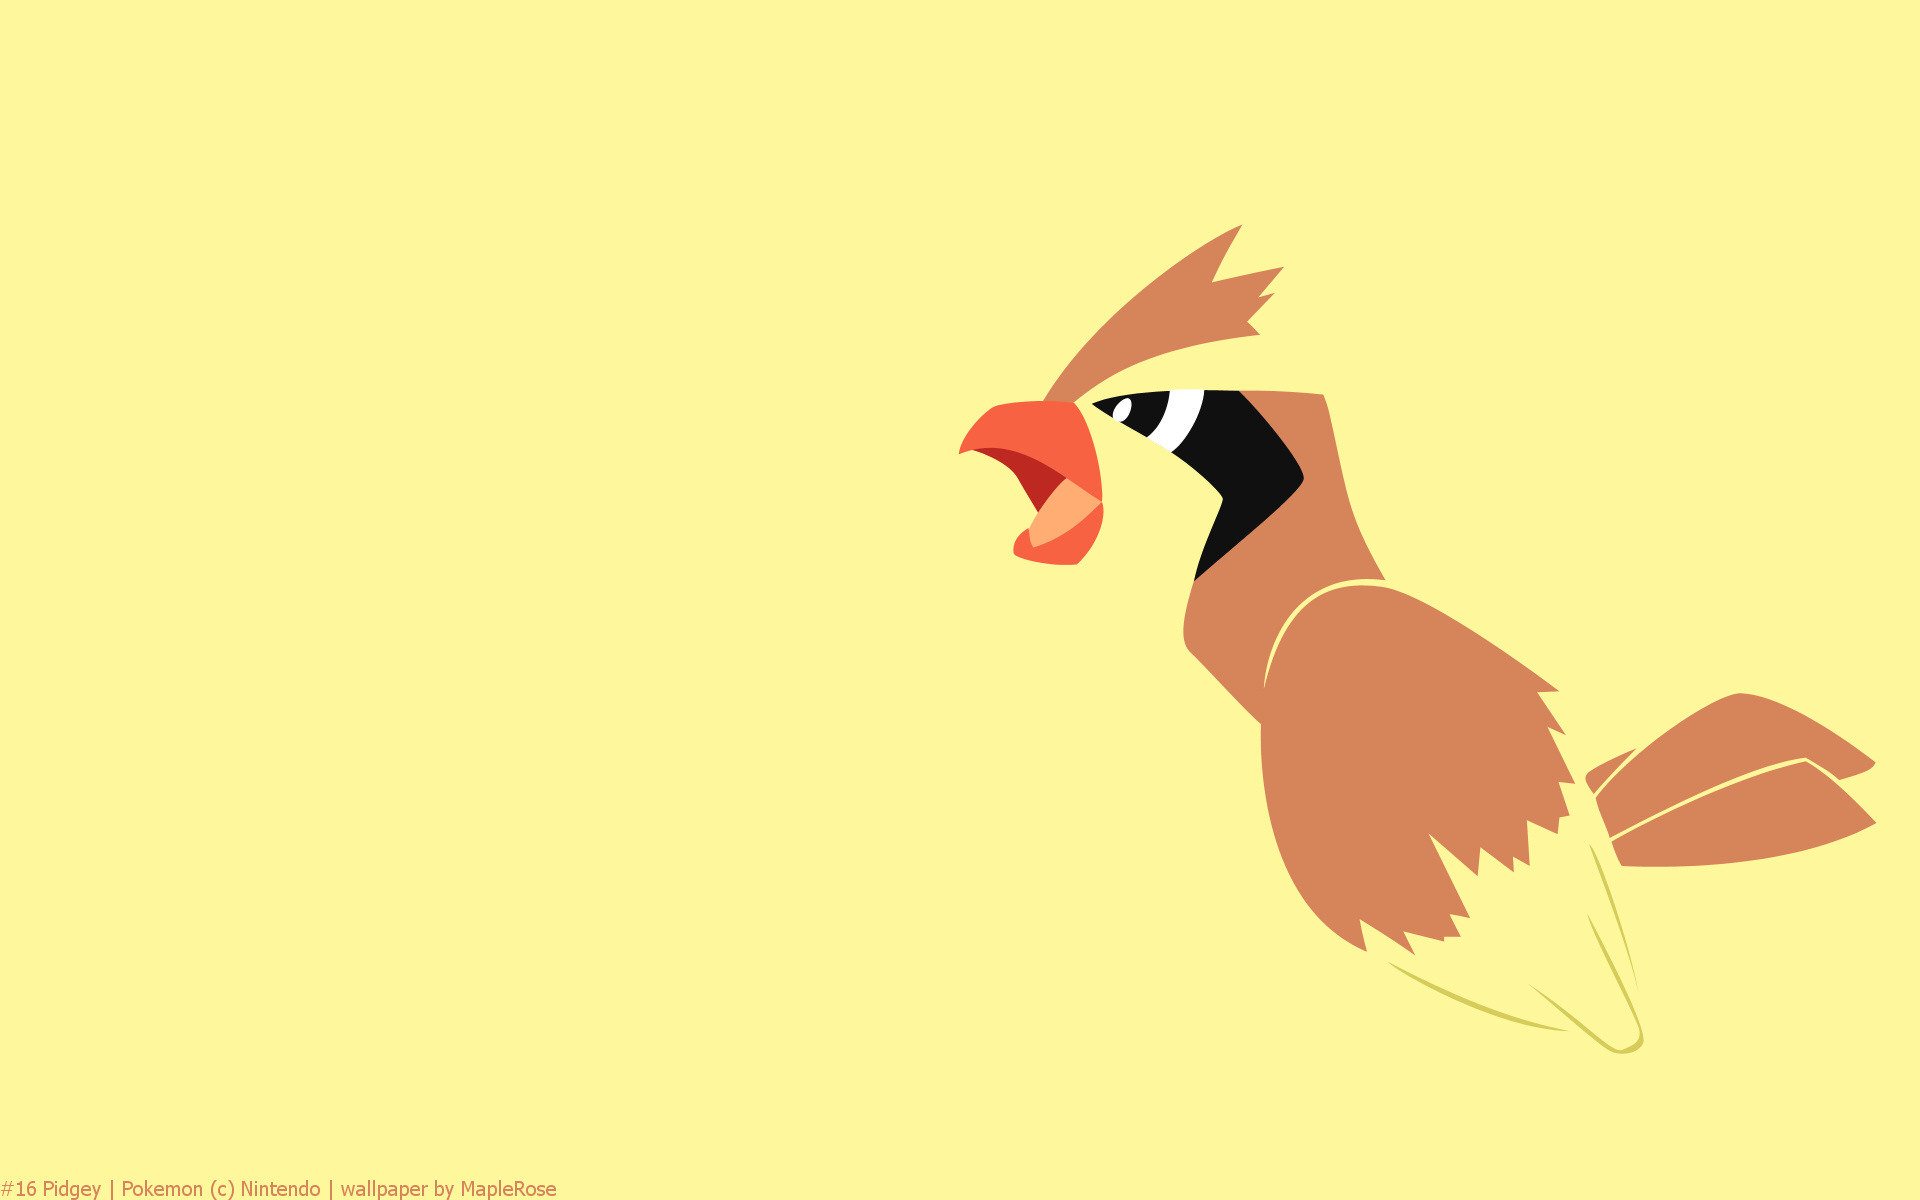 1920x1200 pokemonfan100's everything about pokemon! images Pidgey Wallpaper HD  wallpaper and background photos